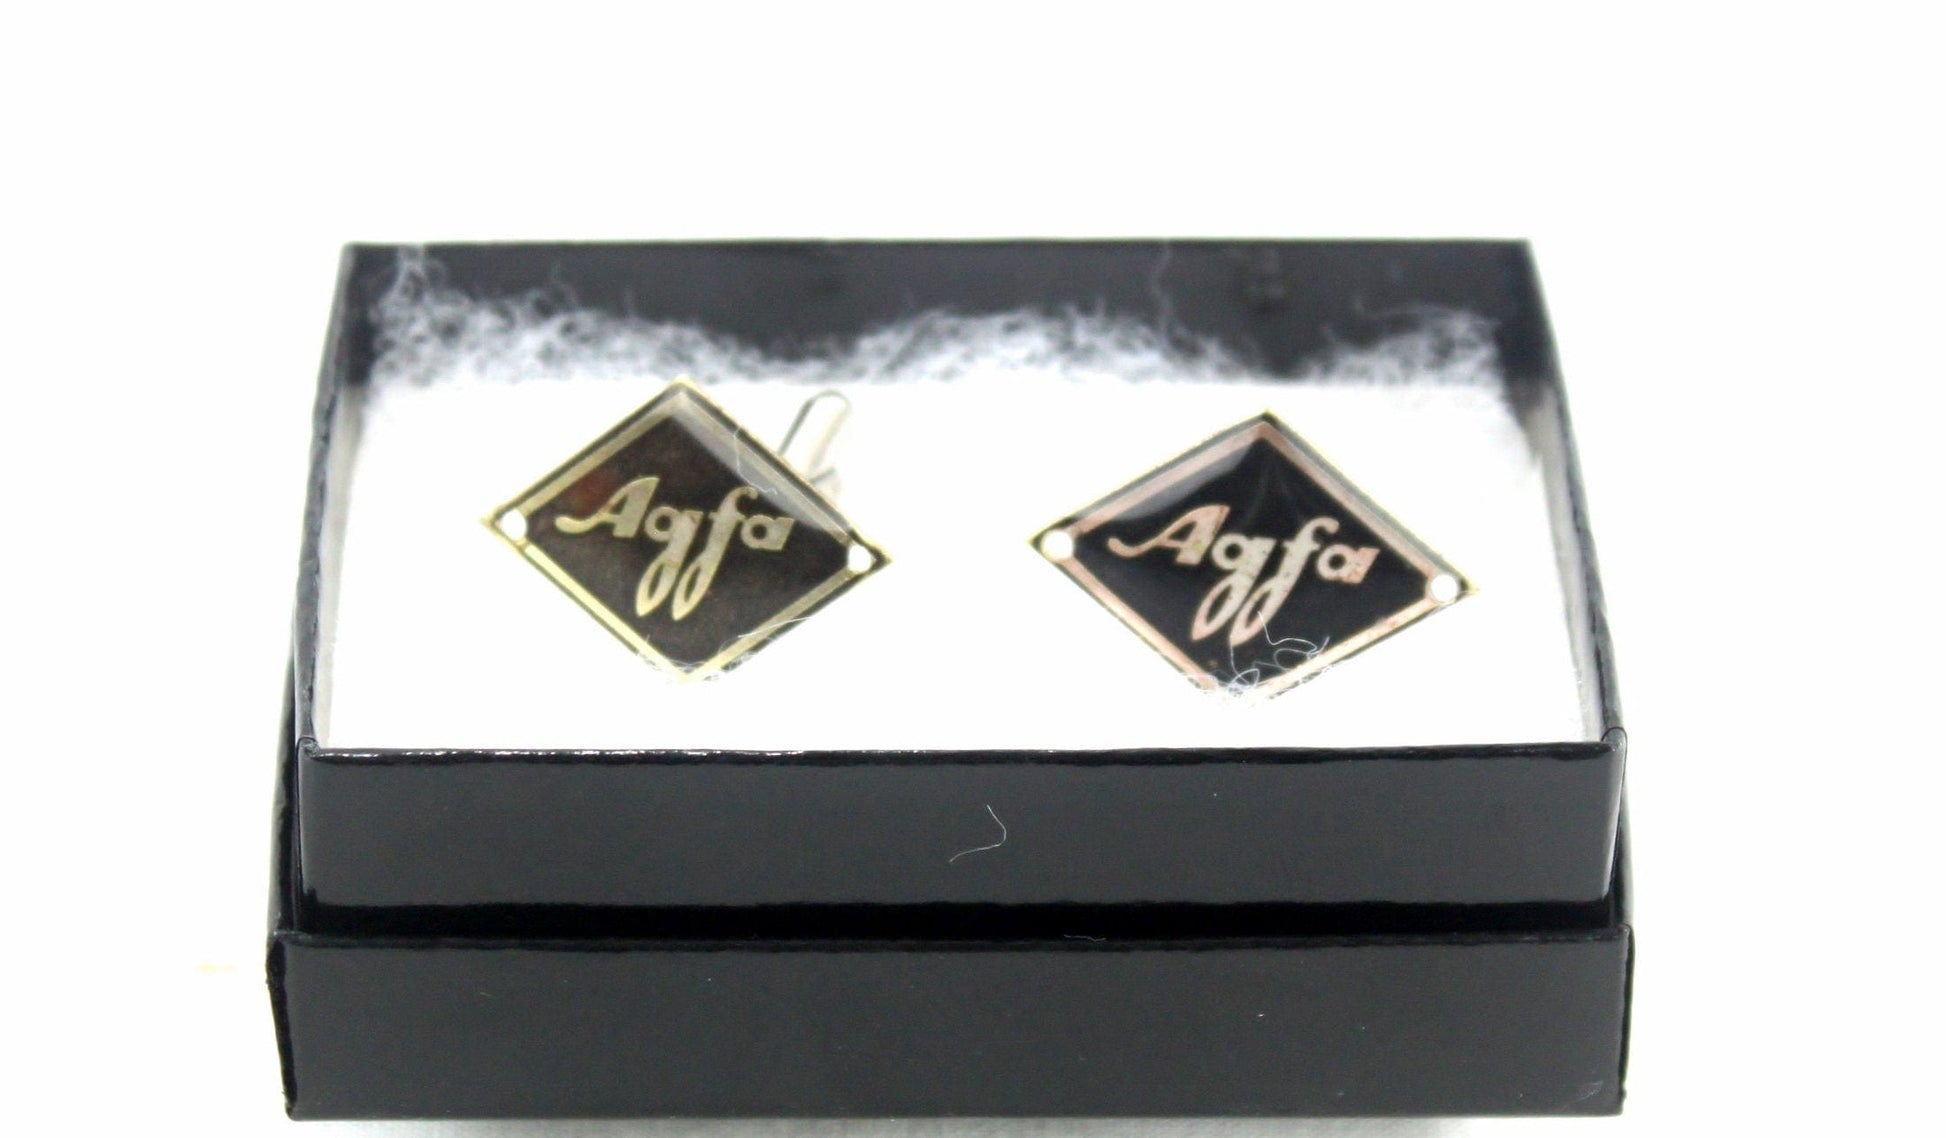 LightAndTimeArt Cufflinks Vintage Iconic AGFA Cuff Links, Gift for him, photographer gift, Handmade in USA, Eco-friendly Statement Jewelry for him, gift for dad